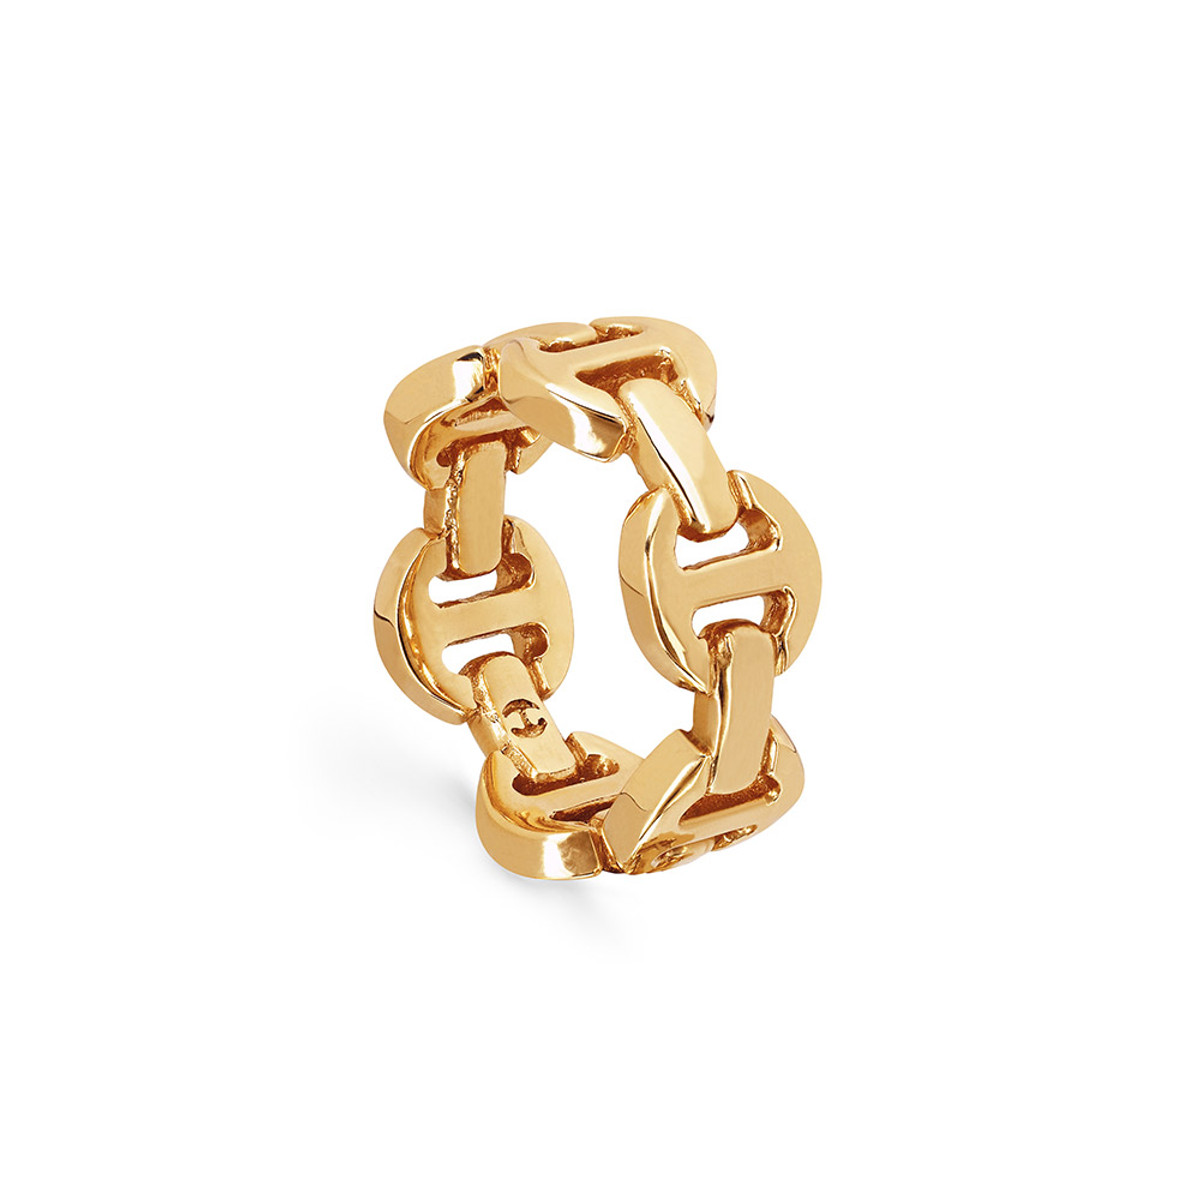 Hoorsenbuhs 18K Yellow Gold Brute Classic Tri-Link Ring-57493 Product Image